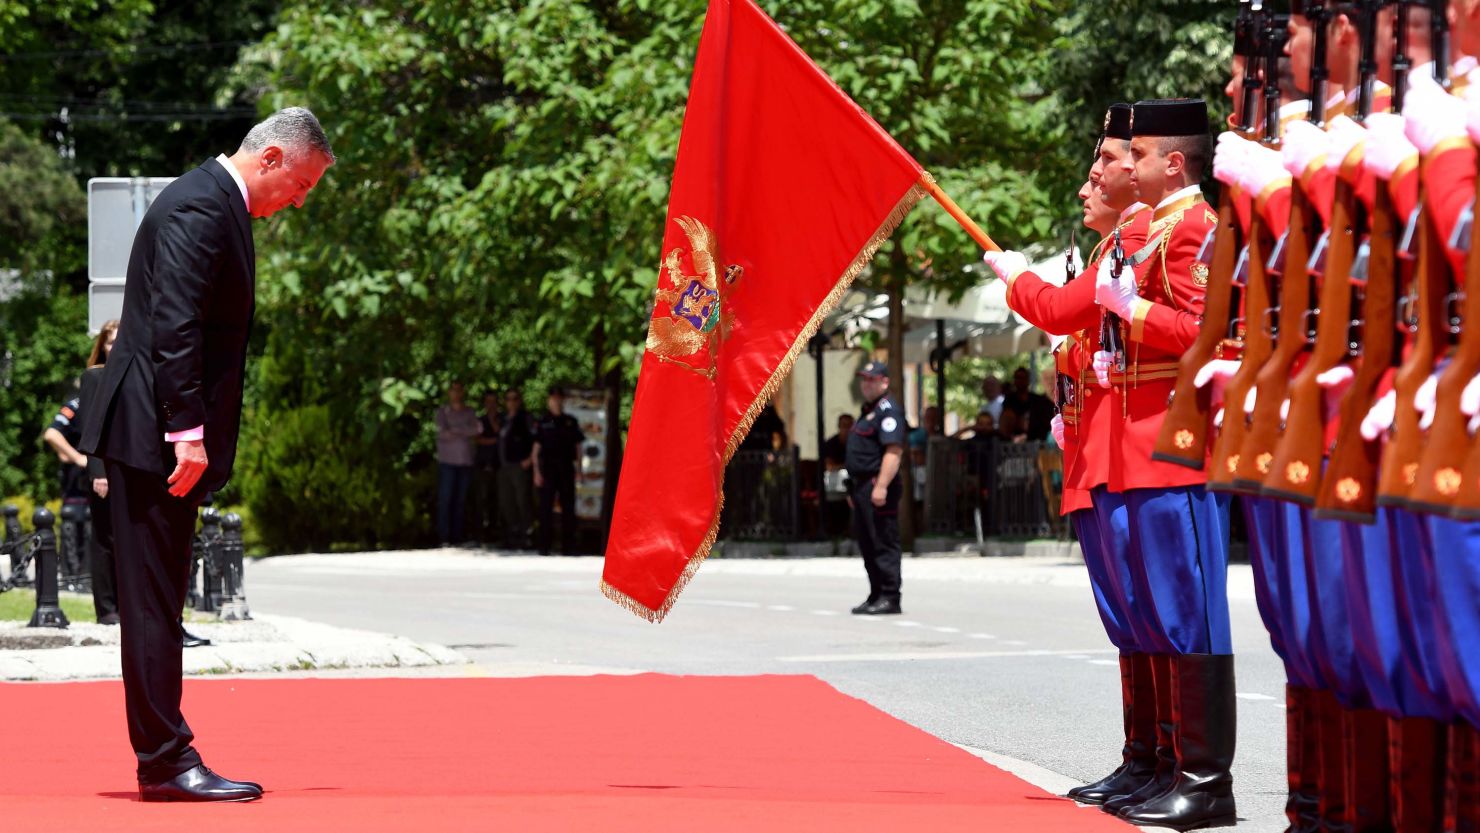 Failure to stand for Montenegro's national anthem could become an offense under a new government proposal.